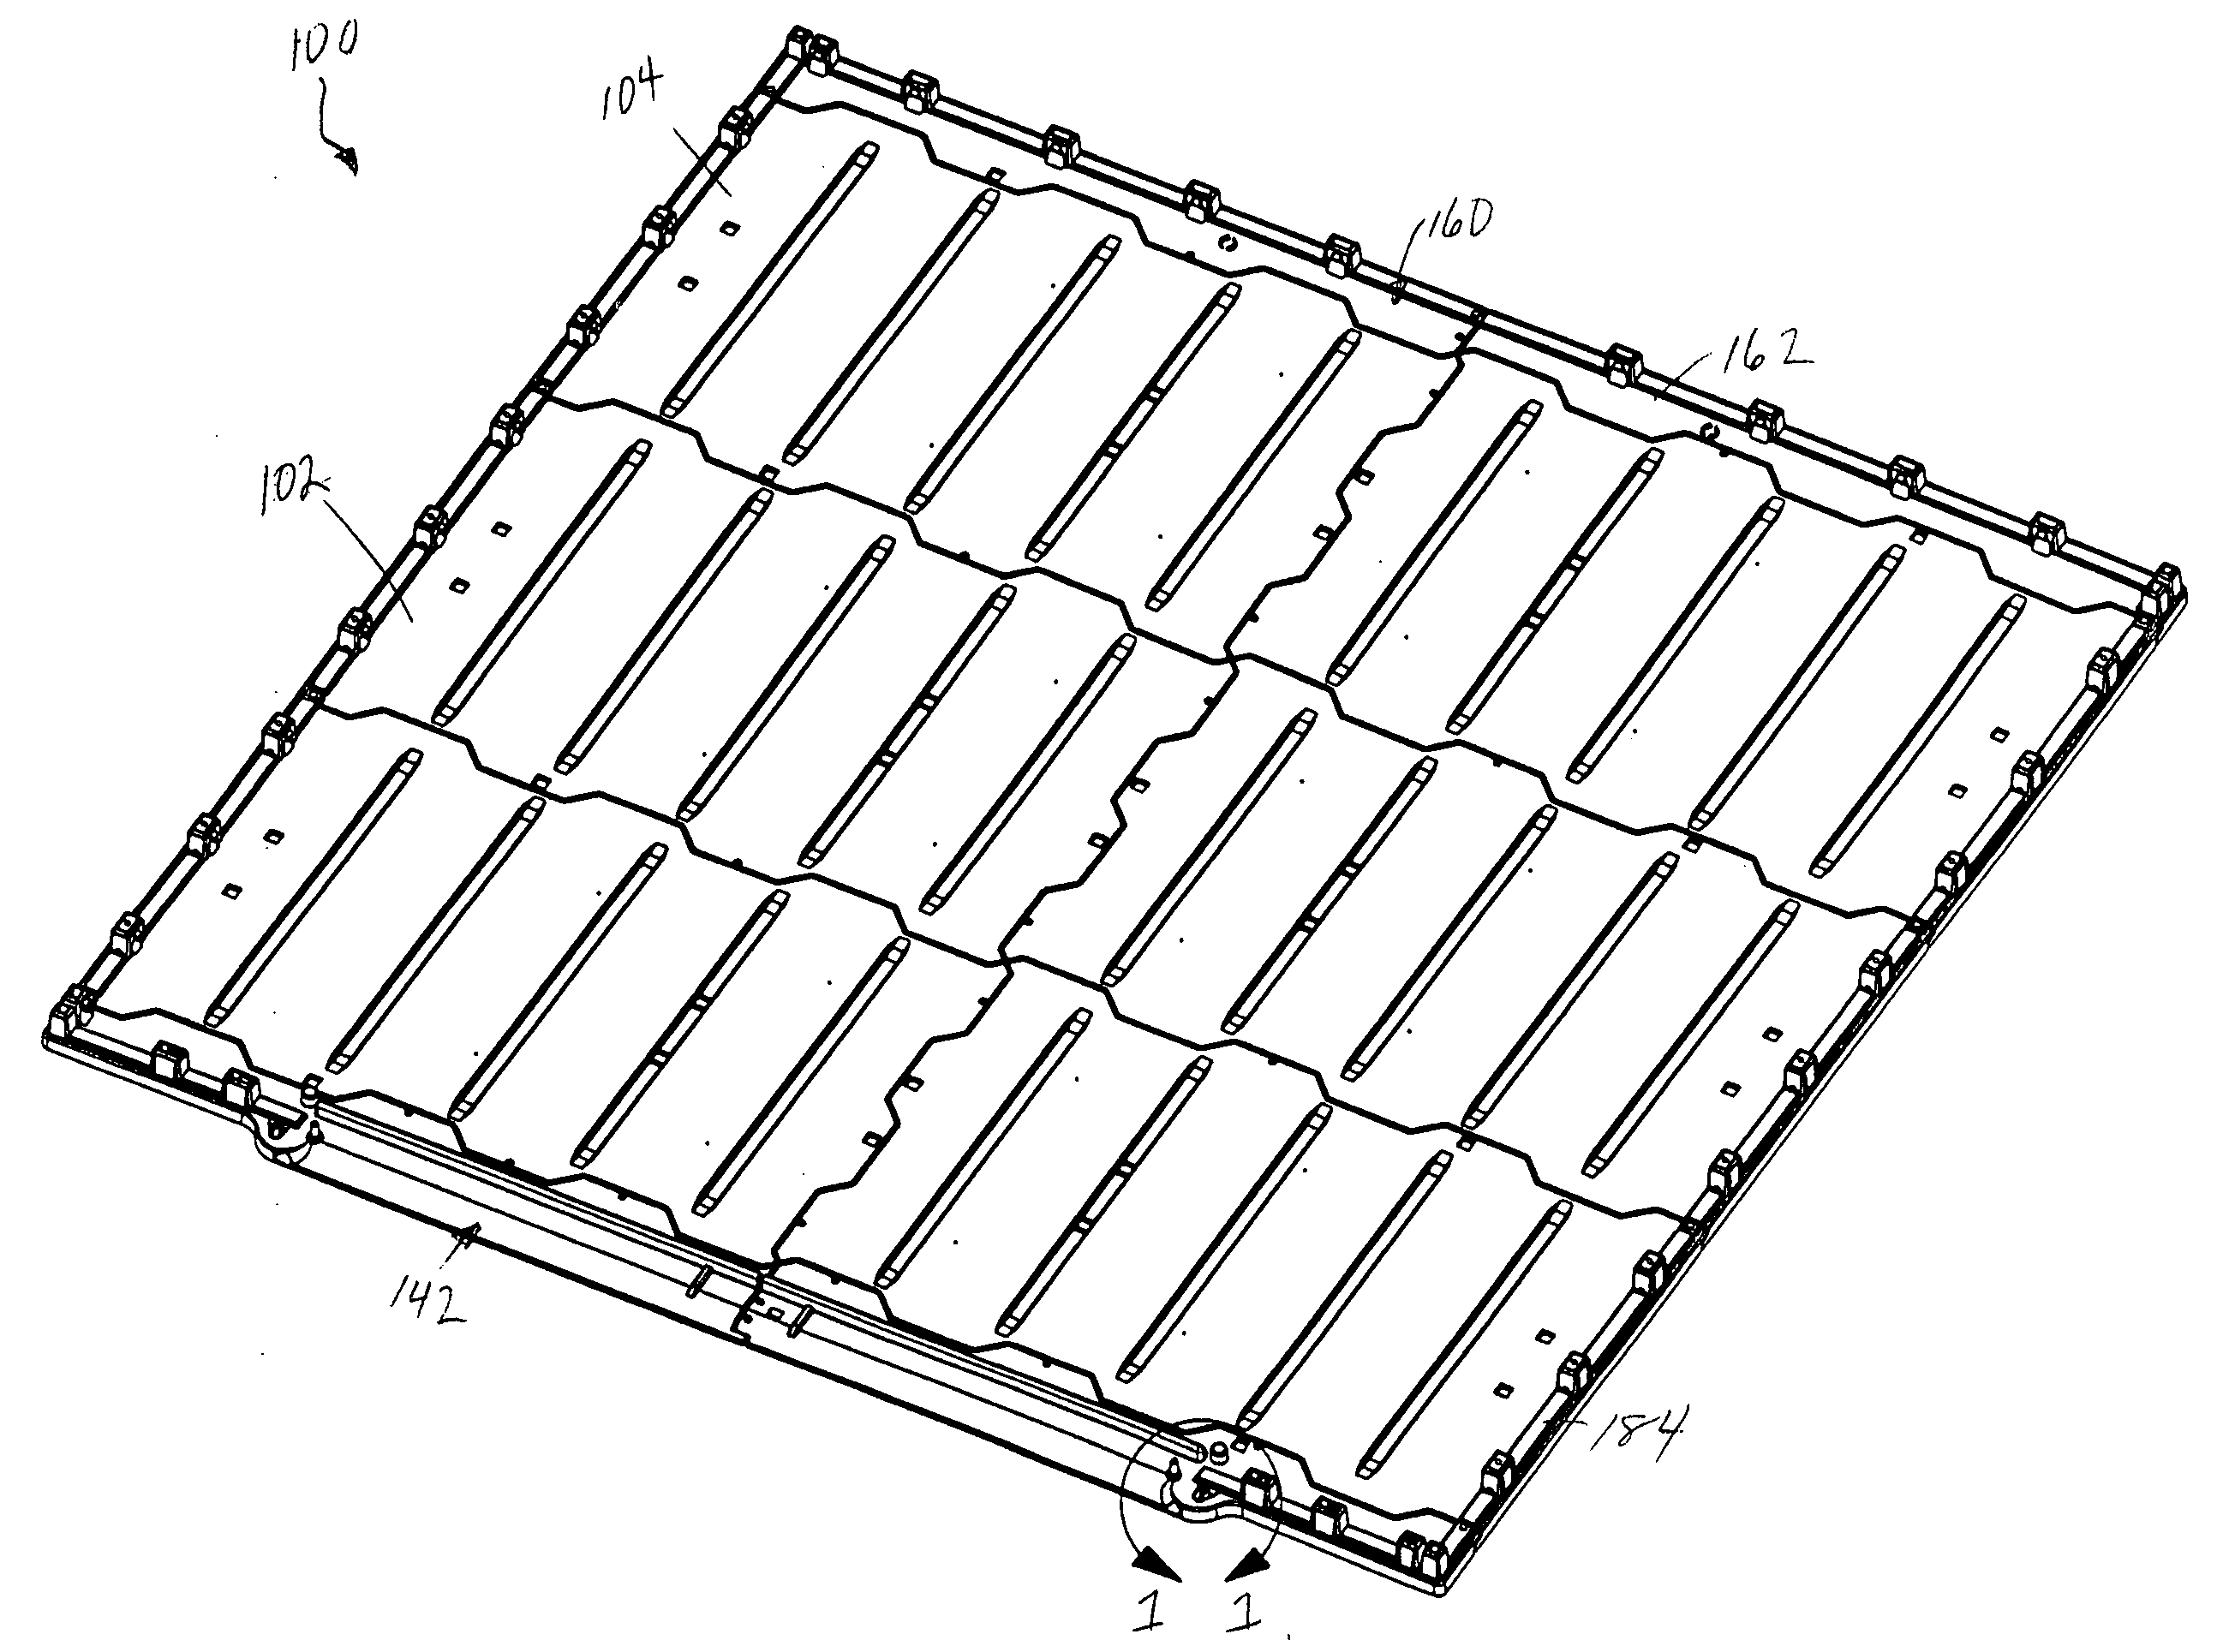 Plastic utility shed flooring system